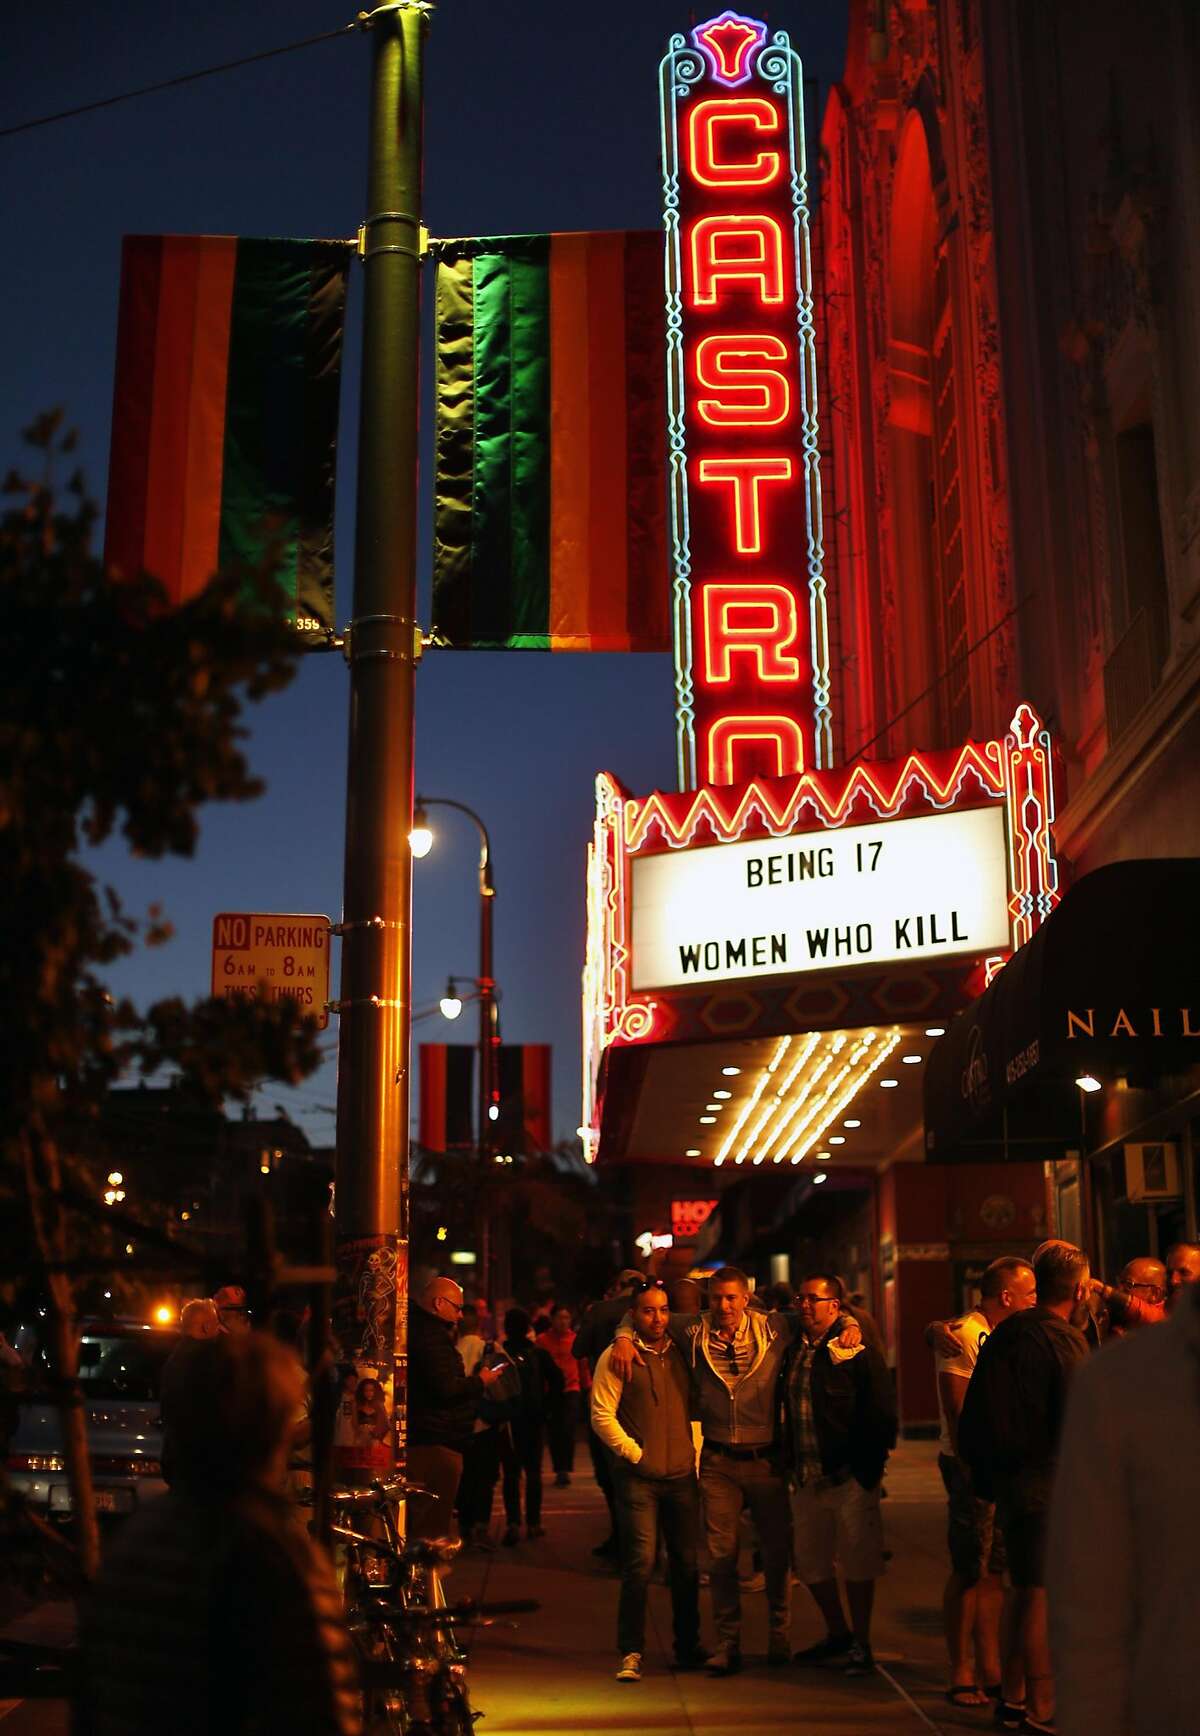 A crowd exits a movie at the Castro Theatre in San Francisco, Calif., on Tuesday, June 21, 2016.